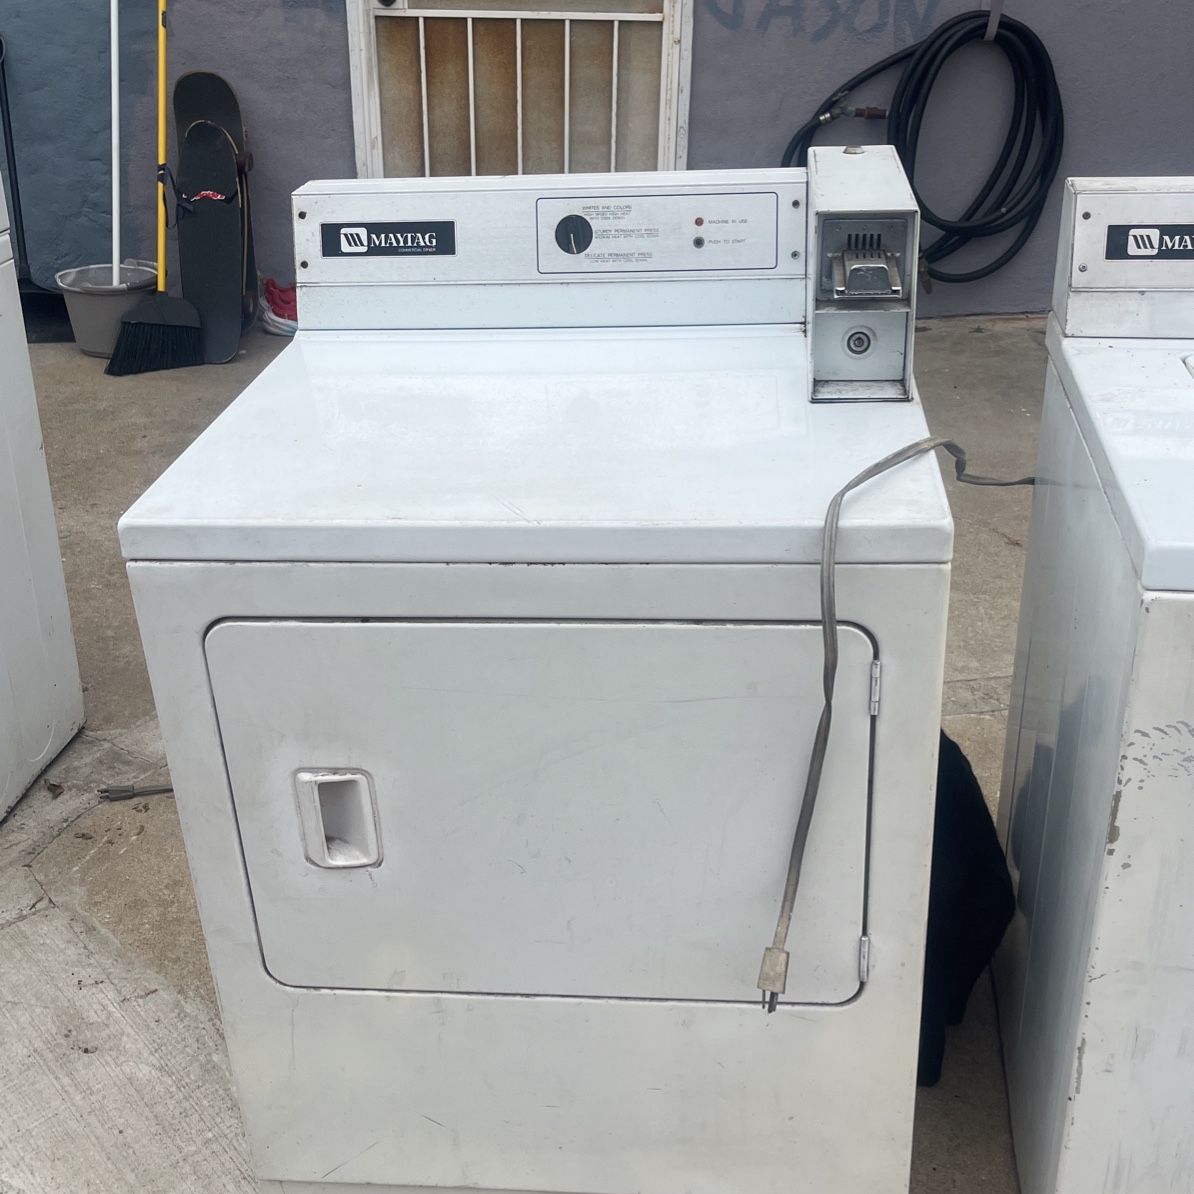 Maytag Coin Operated Washer And Dryer